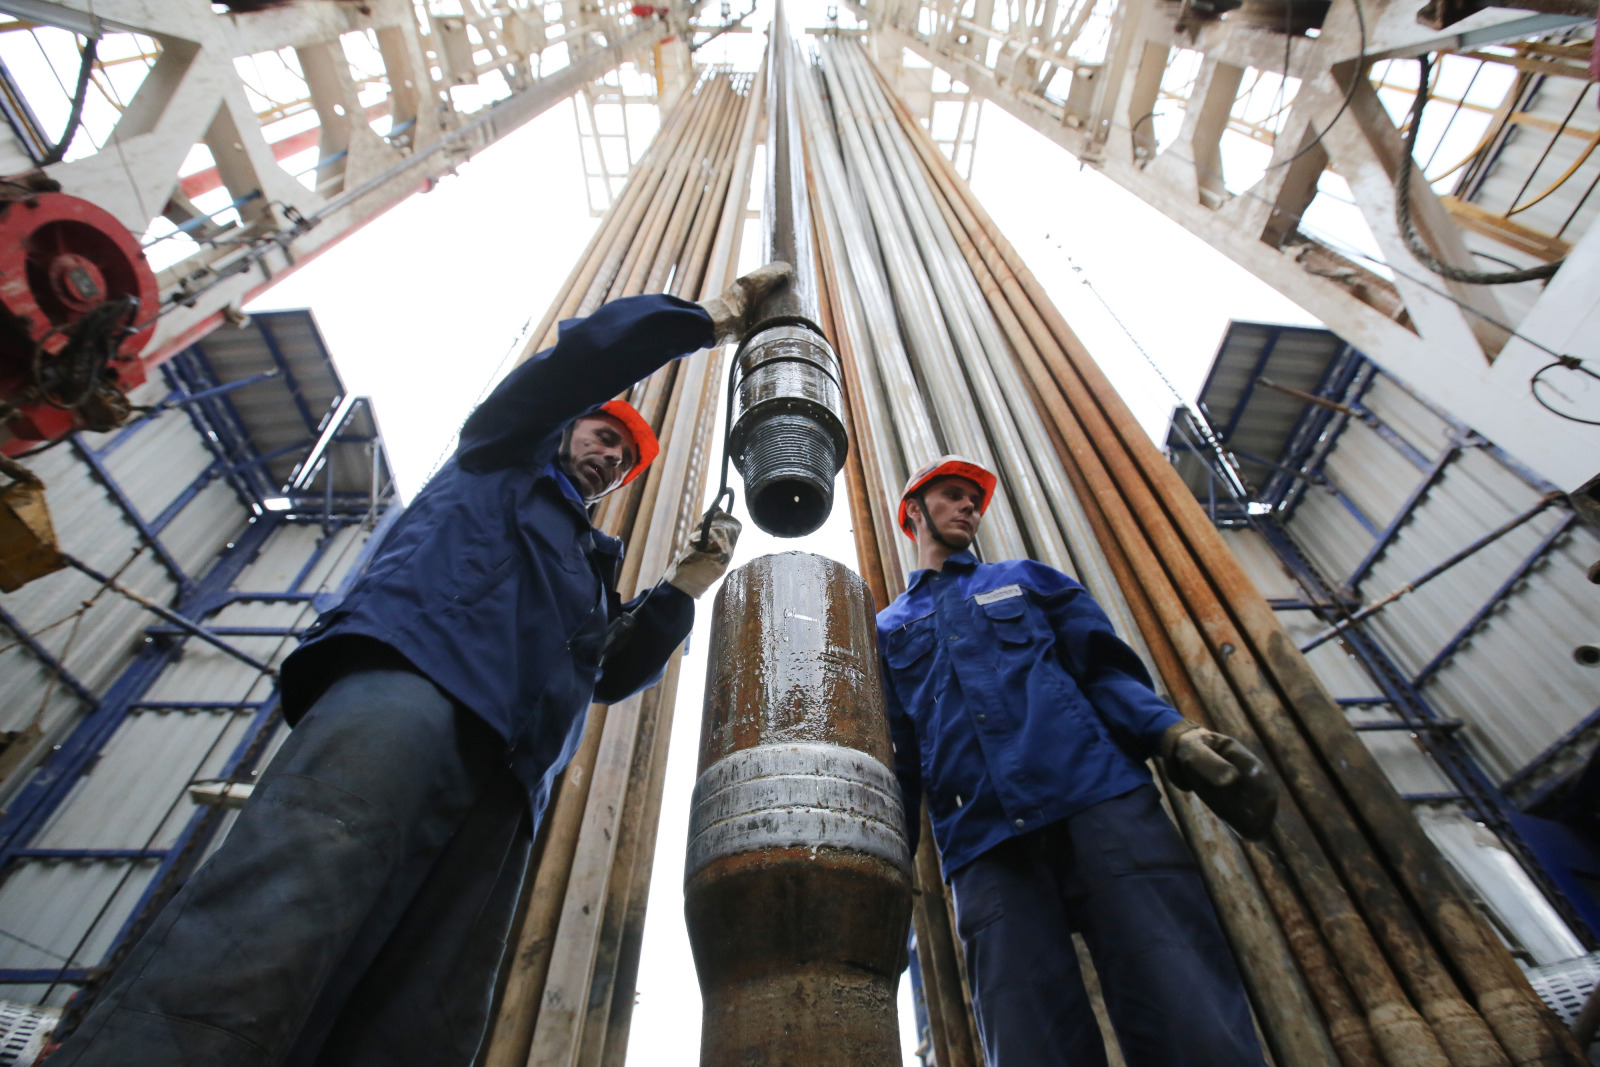 Workers secure drilling pipe sections on an oil drilling tower near Almetyevsk, Russia.